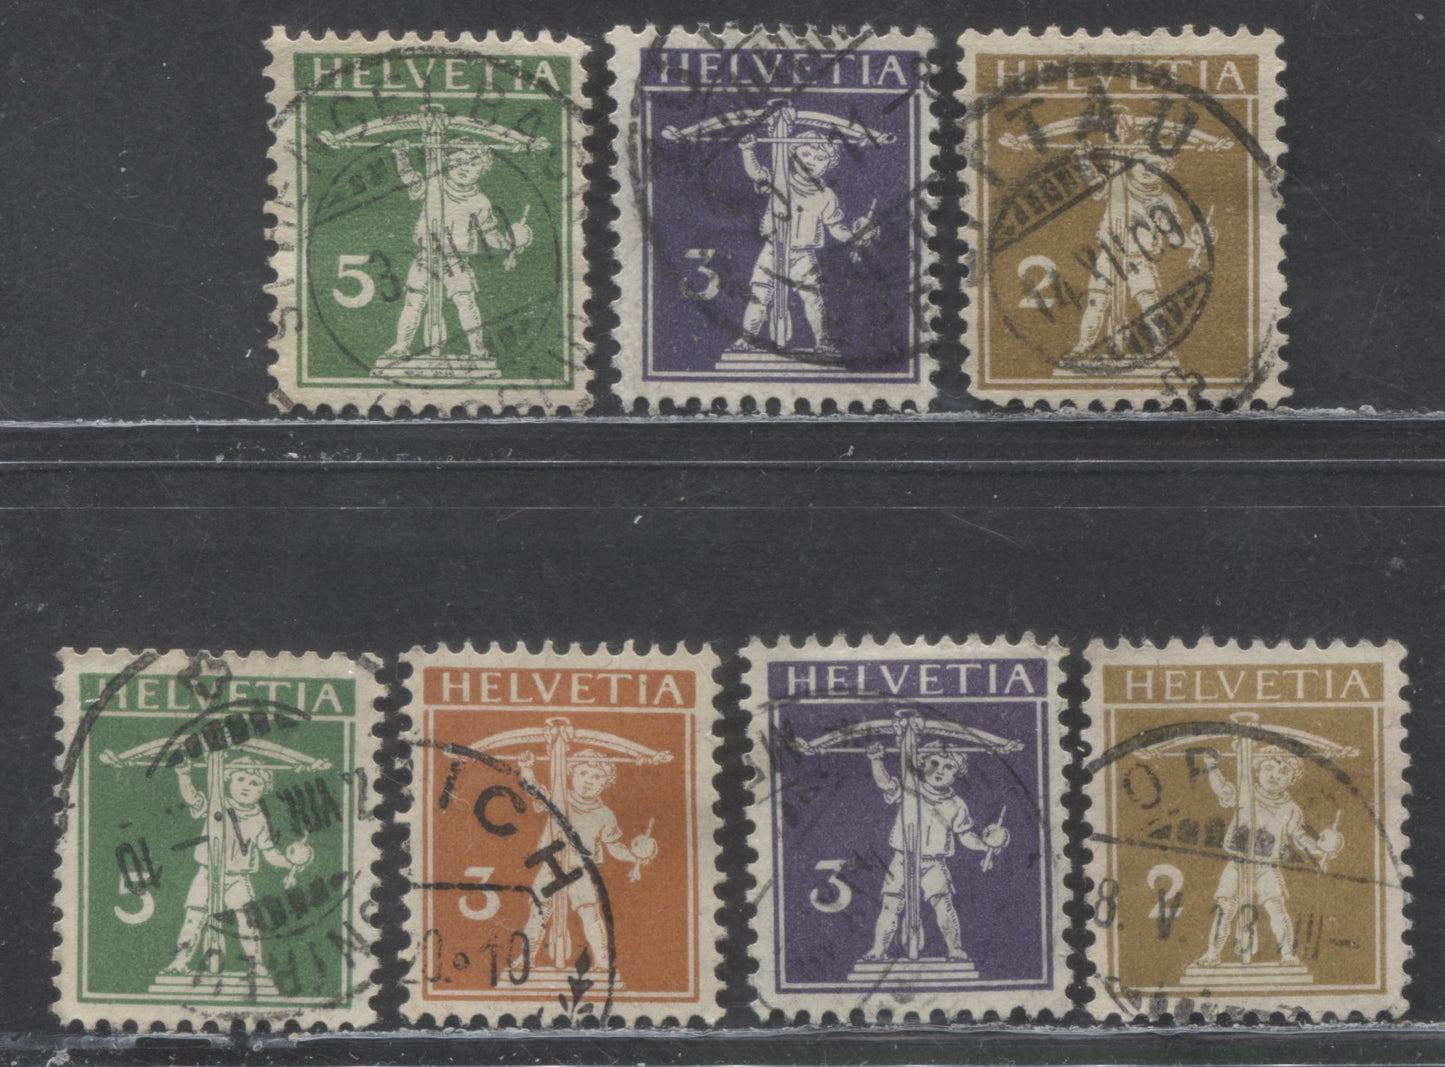 Lot 286 Switzerland SC#146-152 1909-1917 William Tell's Son Issue, Original & Redrawings, 7 Fine/Very Fine Used Singles, Click on Listing to See ALL Pictures, 2022 Scott Classic Cat. $52.25 USD